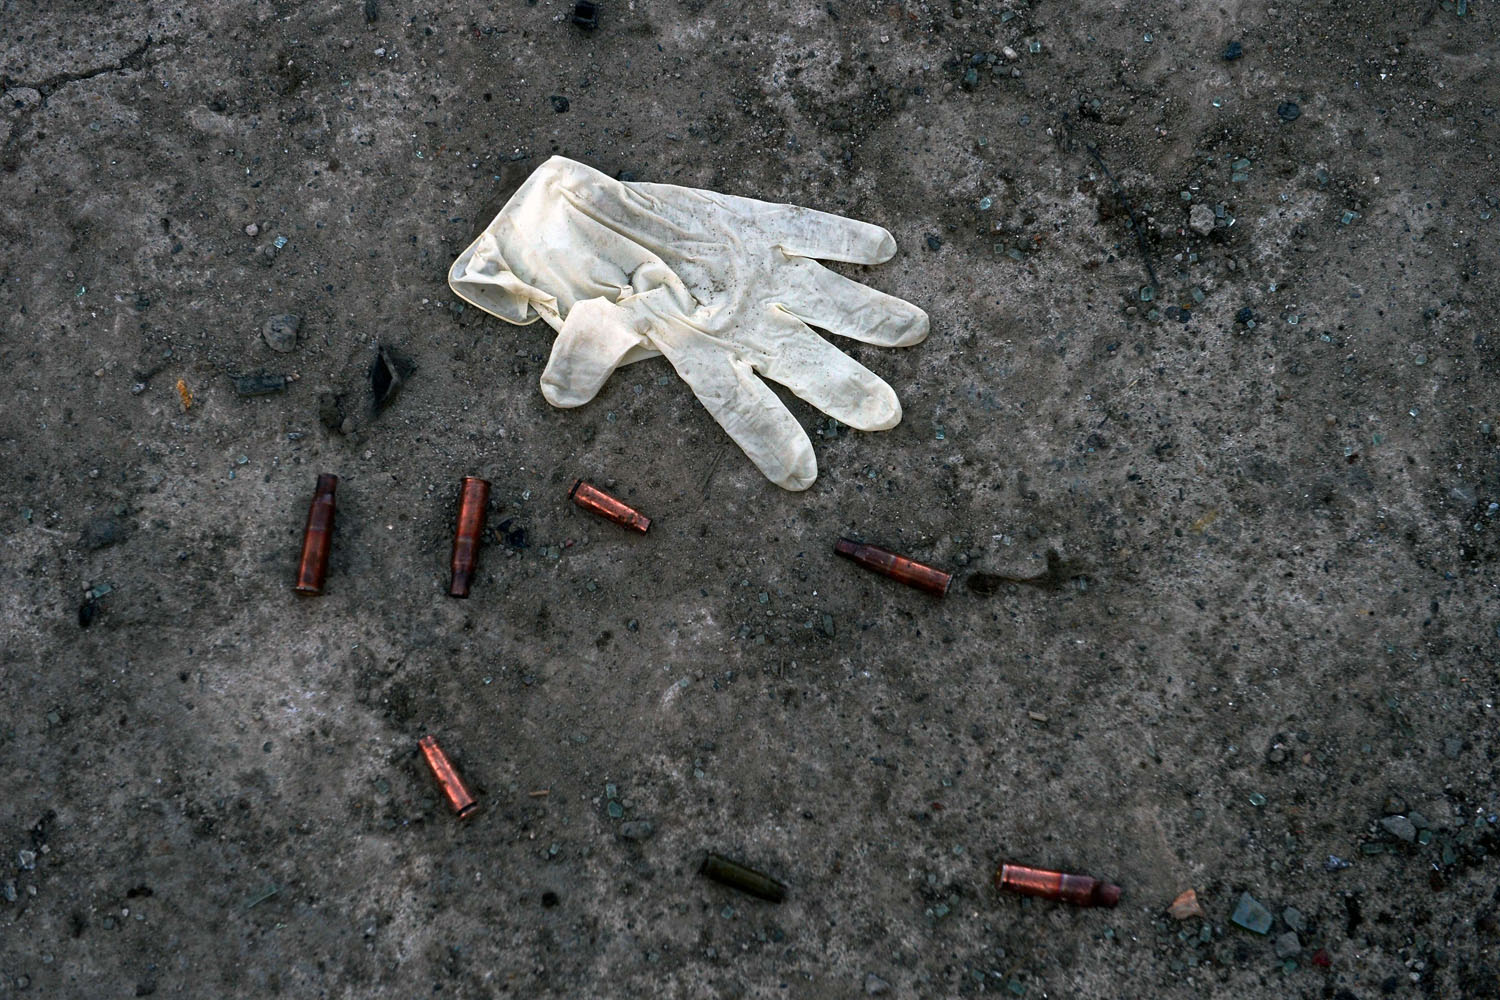 Mar. 25, 2014. A latex glove from an investigator lies on the floor near empty bullet casings at the site of a deadly attack on an Afghan election commission office in Kabul. Insurgents have vowed a campaign of violence to disrupt the ballot on April 5, urging their fighters to attack polling staff, voters and security forces in the run-up to election day.